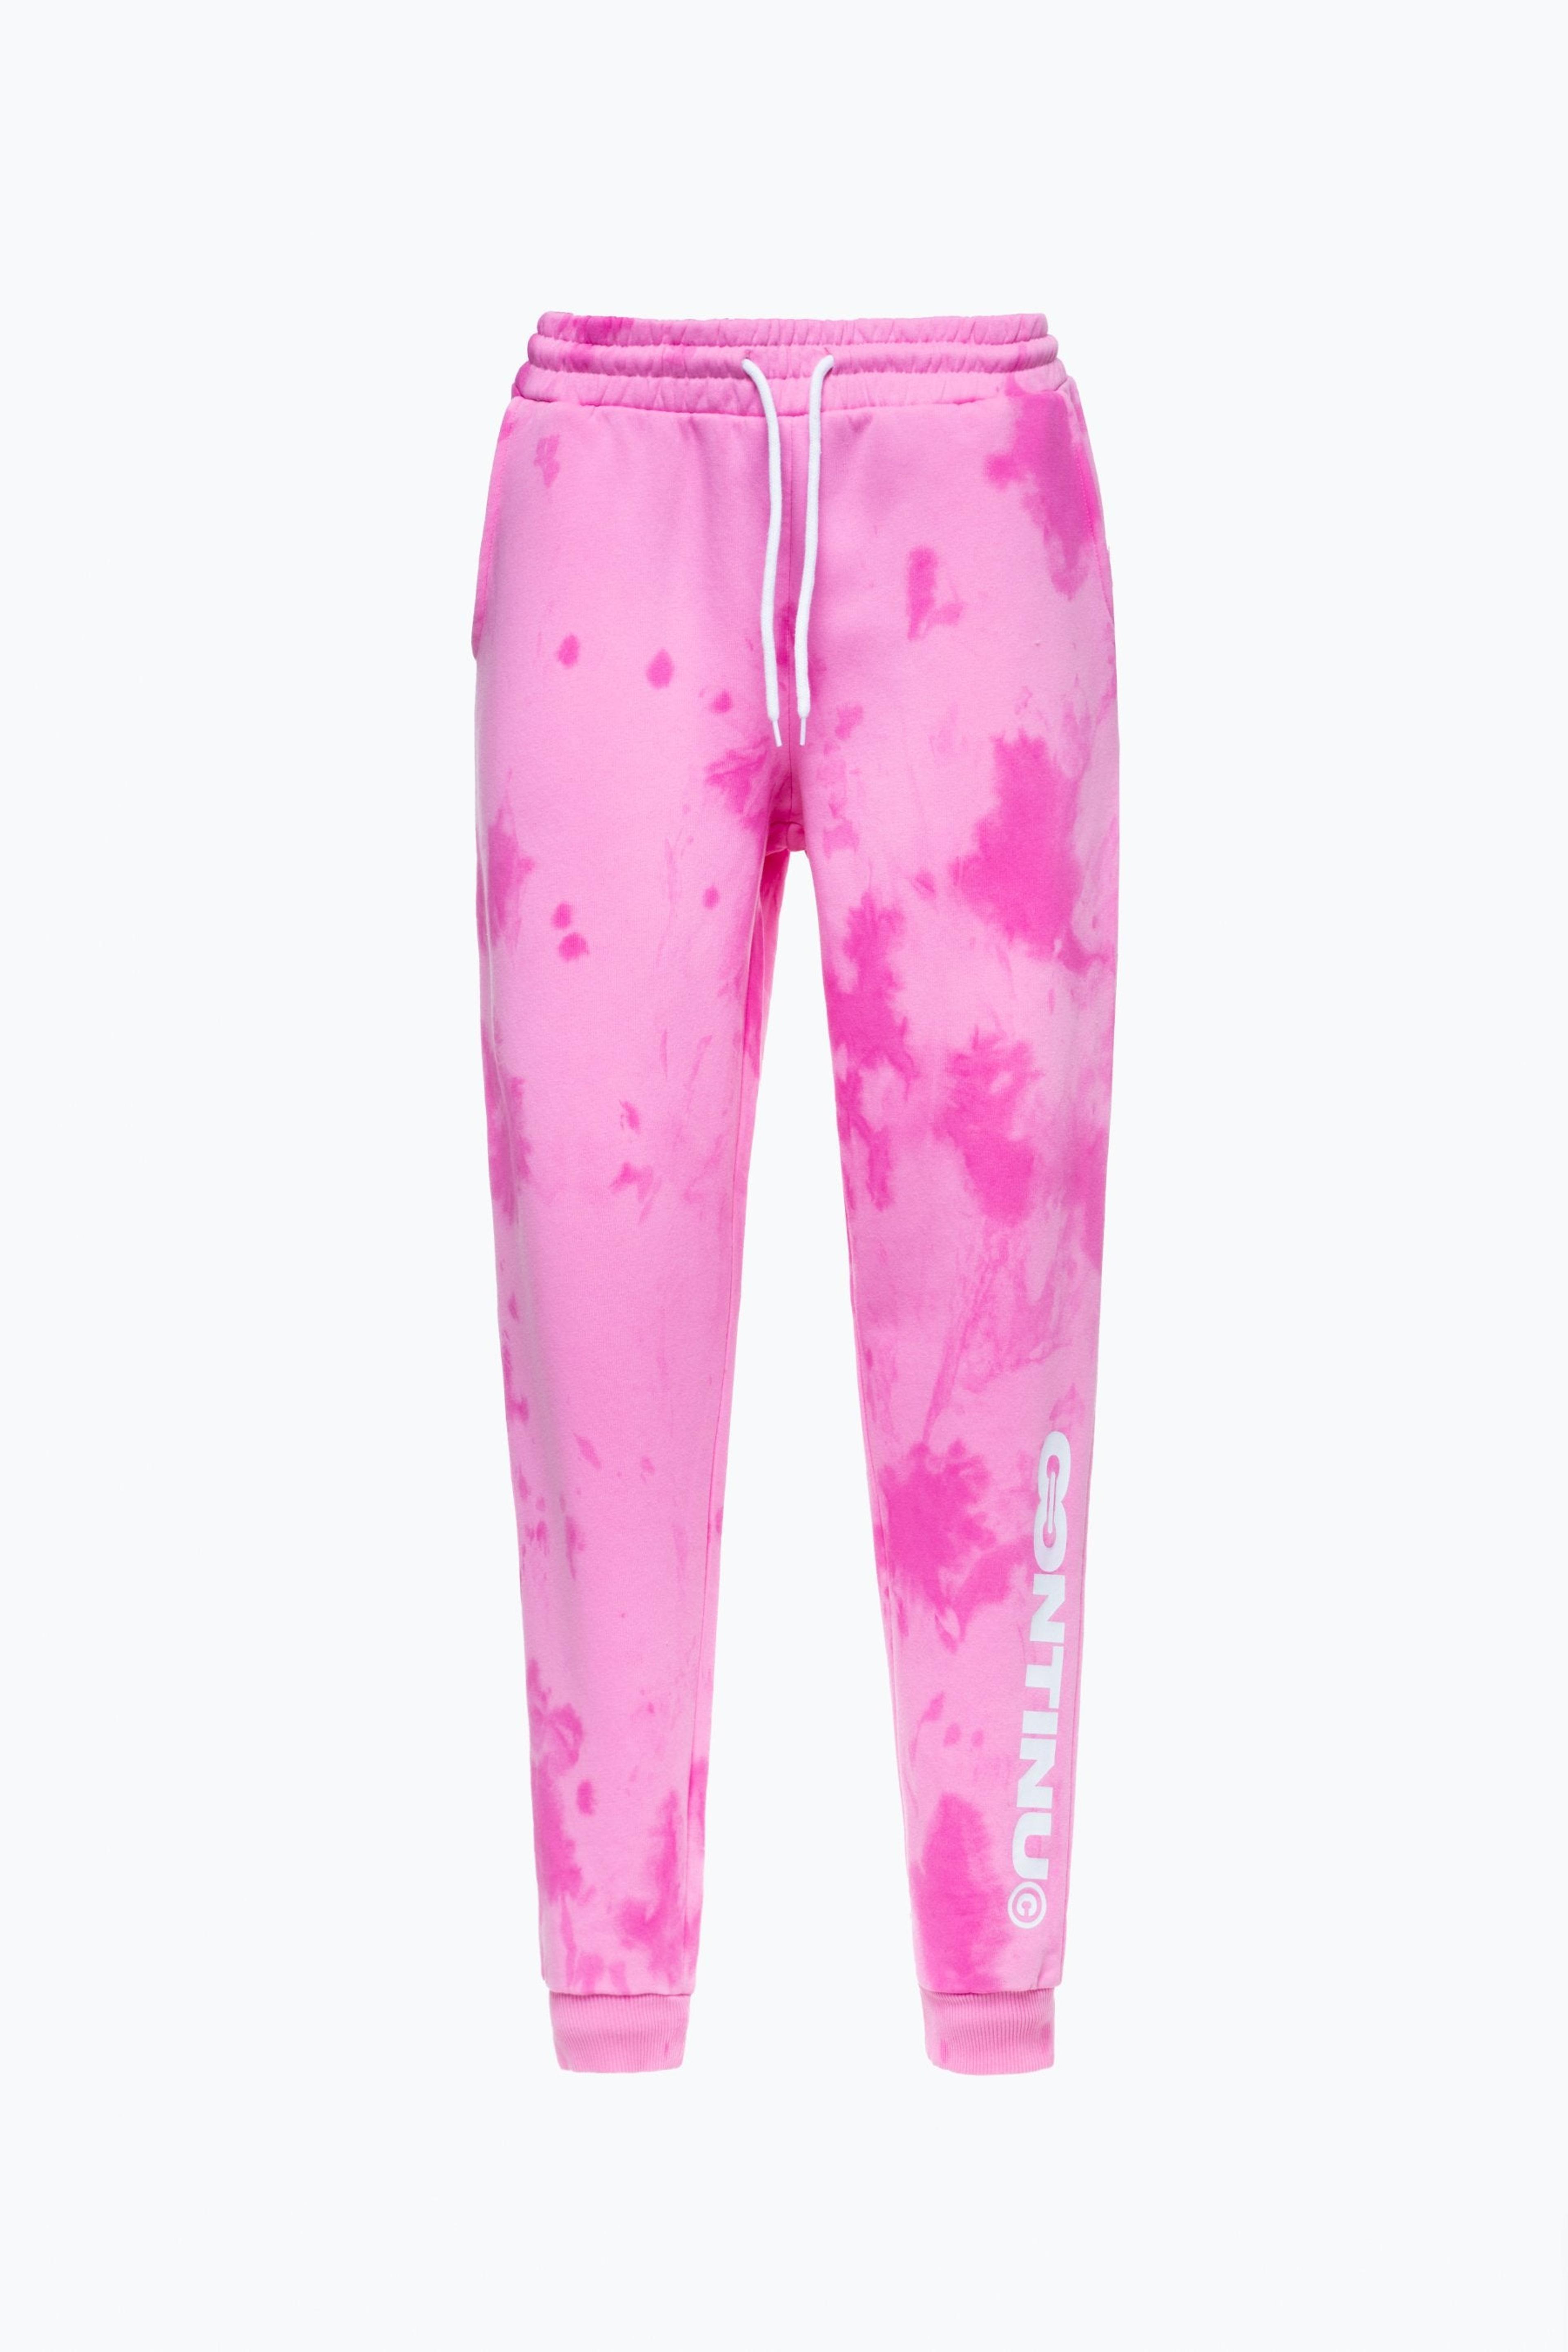 Alternate View 8 of CONTINU8 PINK TIE DYE JOGGERS